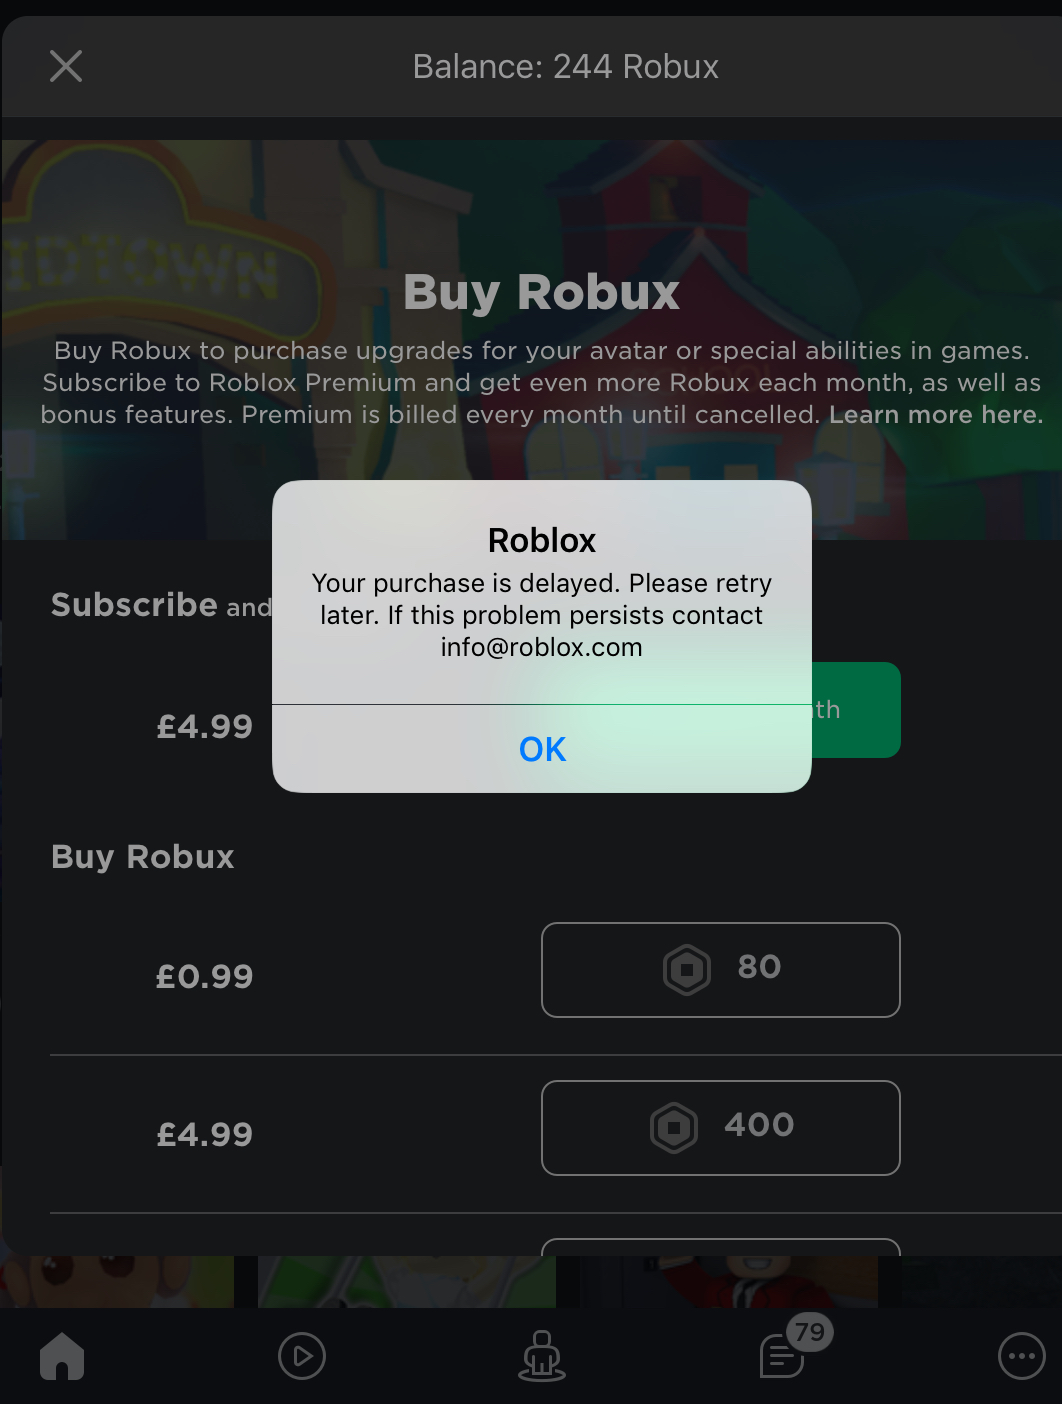 Tried Buying Roblox Premium For Five Pounds Fandom - 80 robux avatars